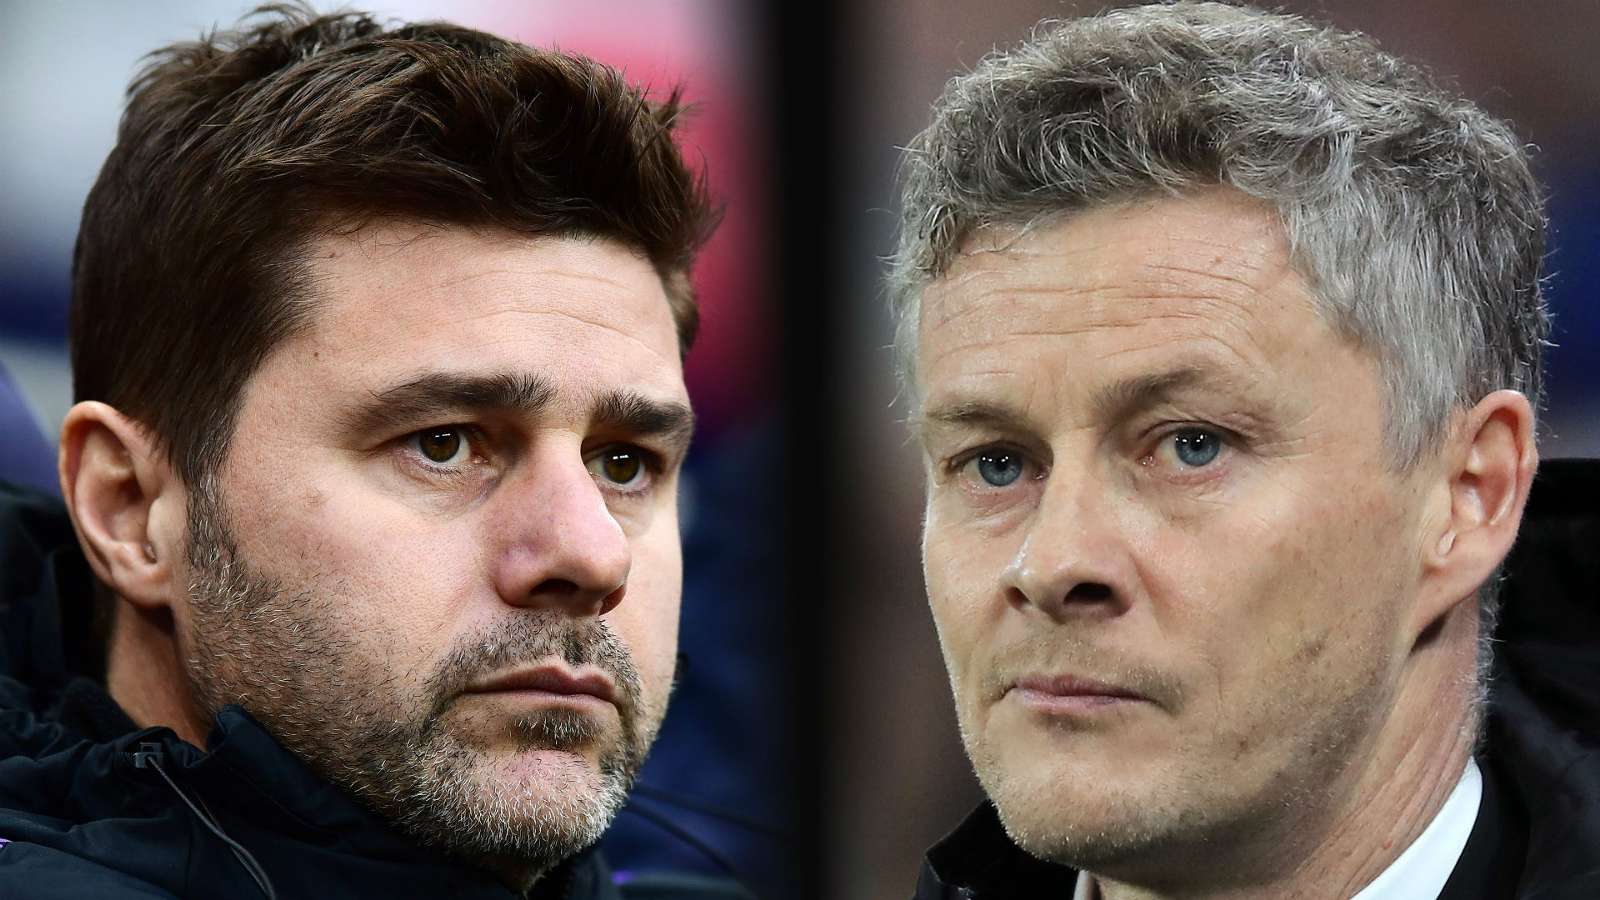 Pochettino would be great for Man Utd but Solskjaer should be given more time - Kleberson - Bóng Đá